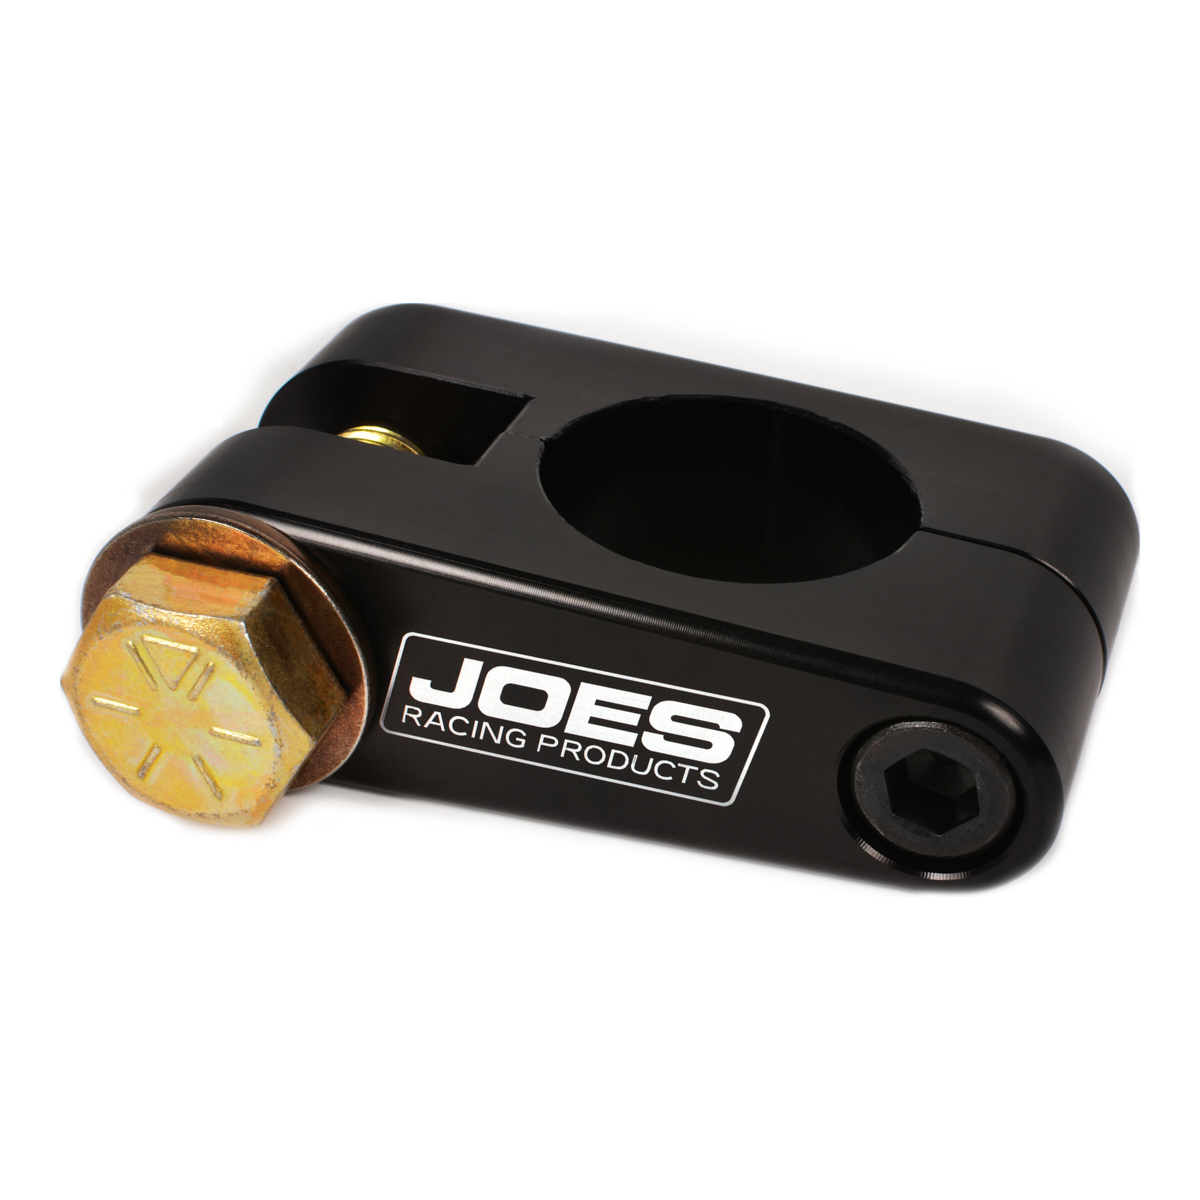 Joes Racing Products 11100-B Panhard Bar Bracket, Frame Mount, Clamp-On, Aluminum, Black Anodized, 1-3/4 in Tubing, Each